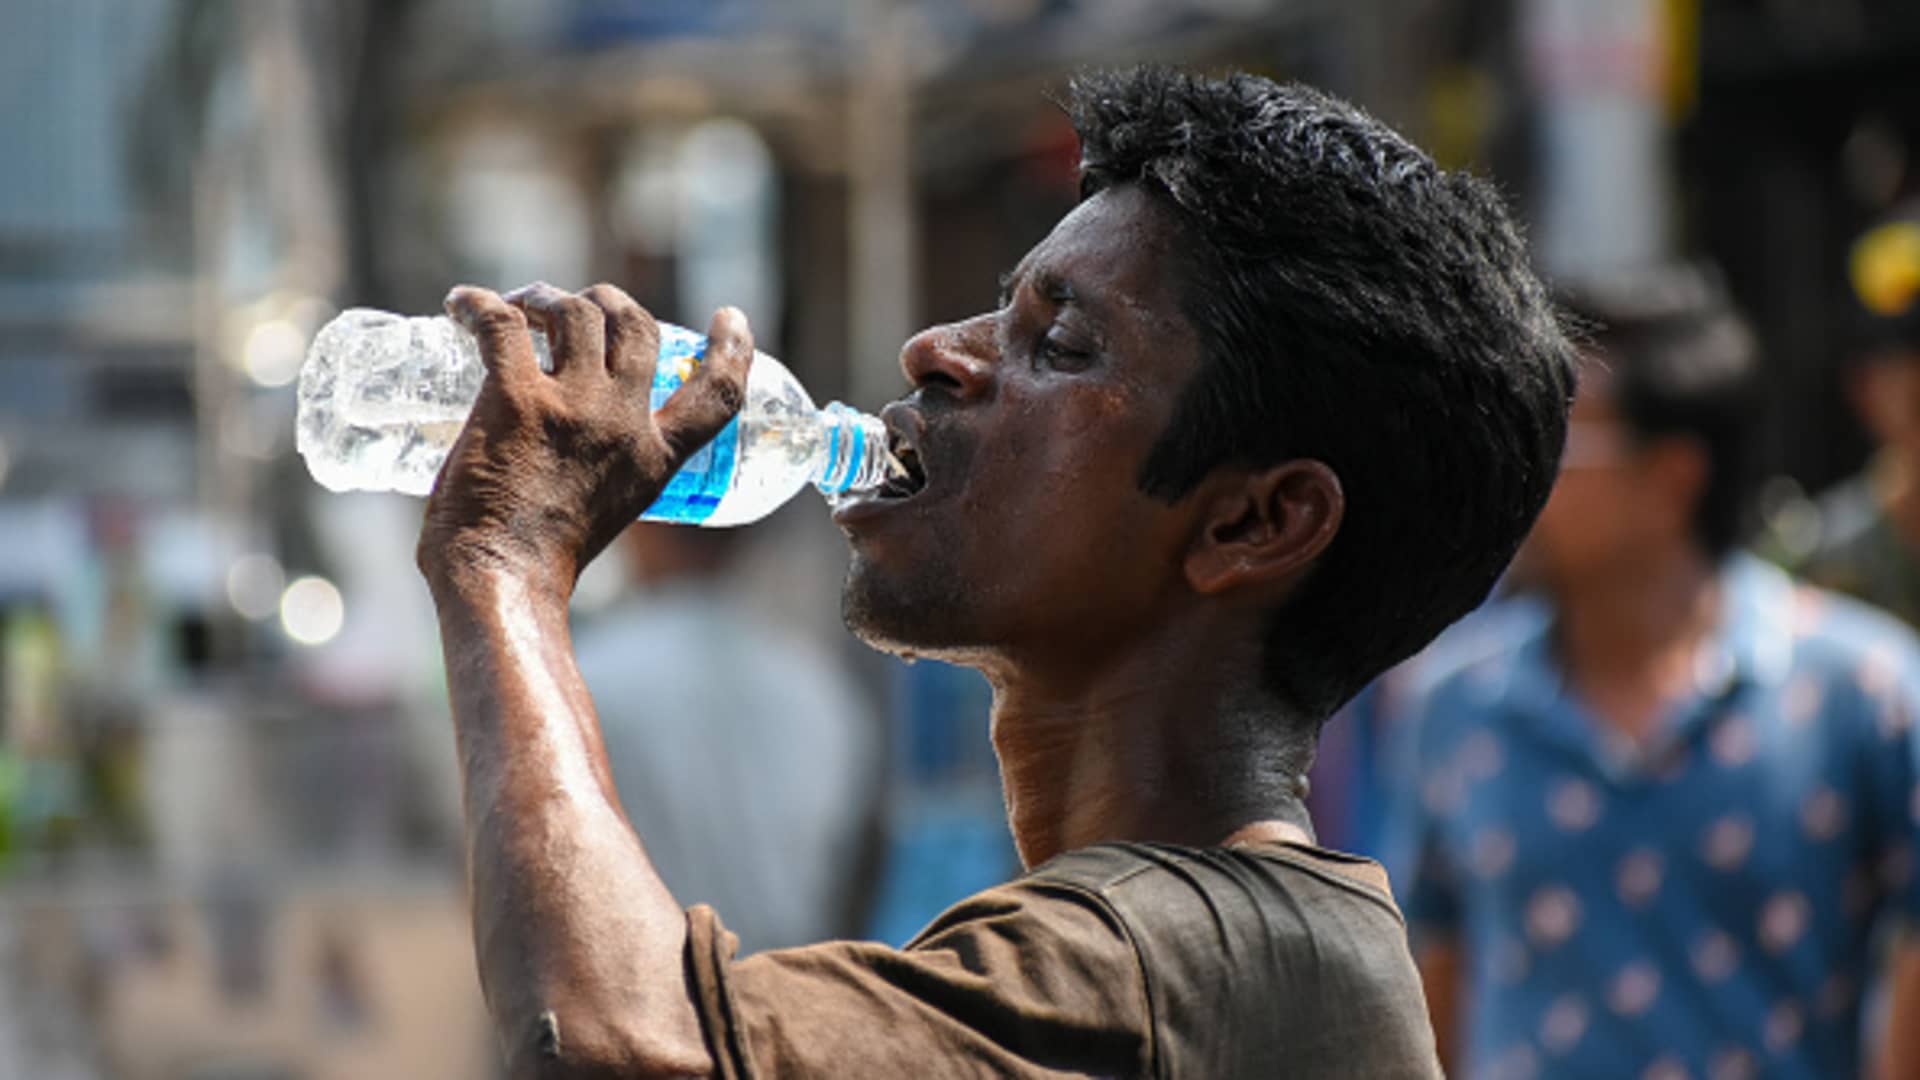 A man is seen drinking water to relieve himself of summer heat , at a street side in Kolkata, India, on 29 April 2022.